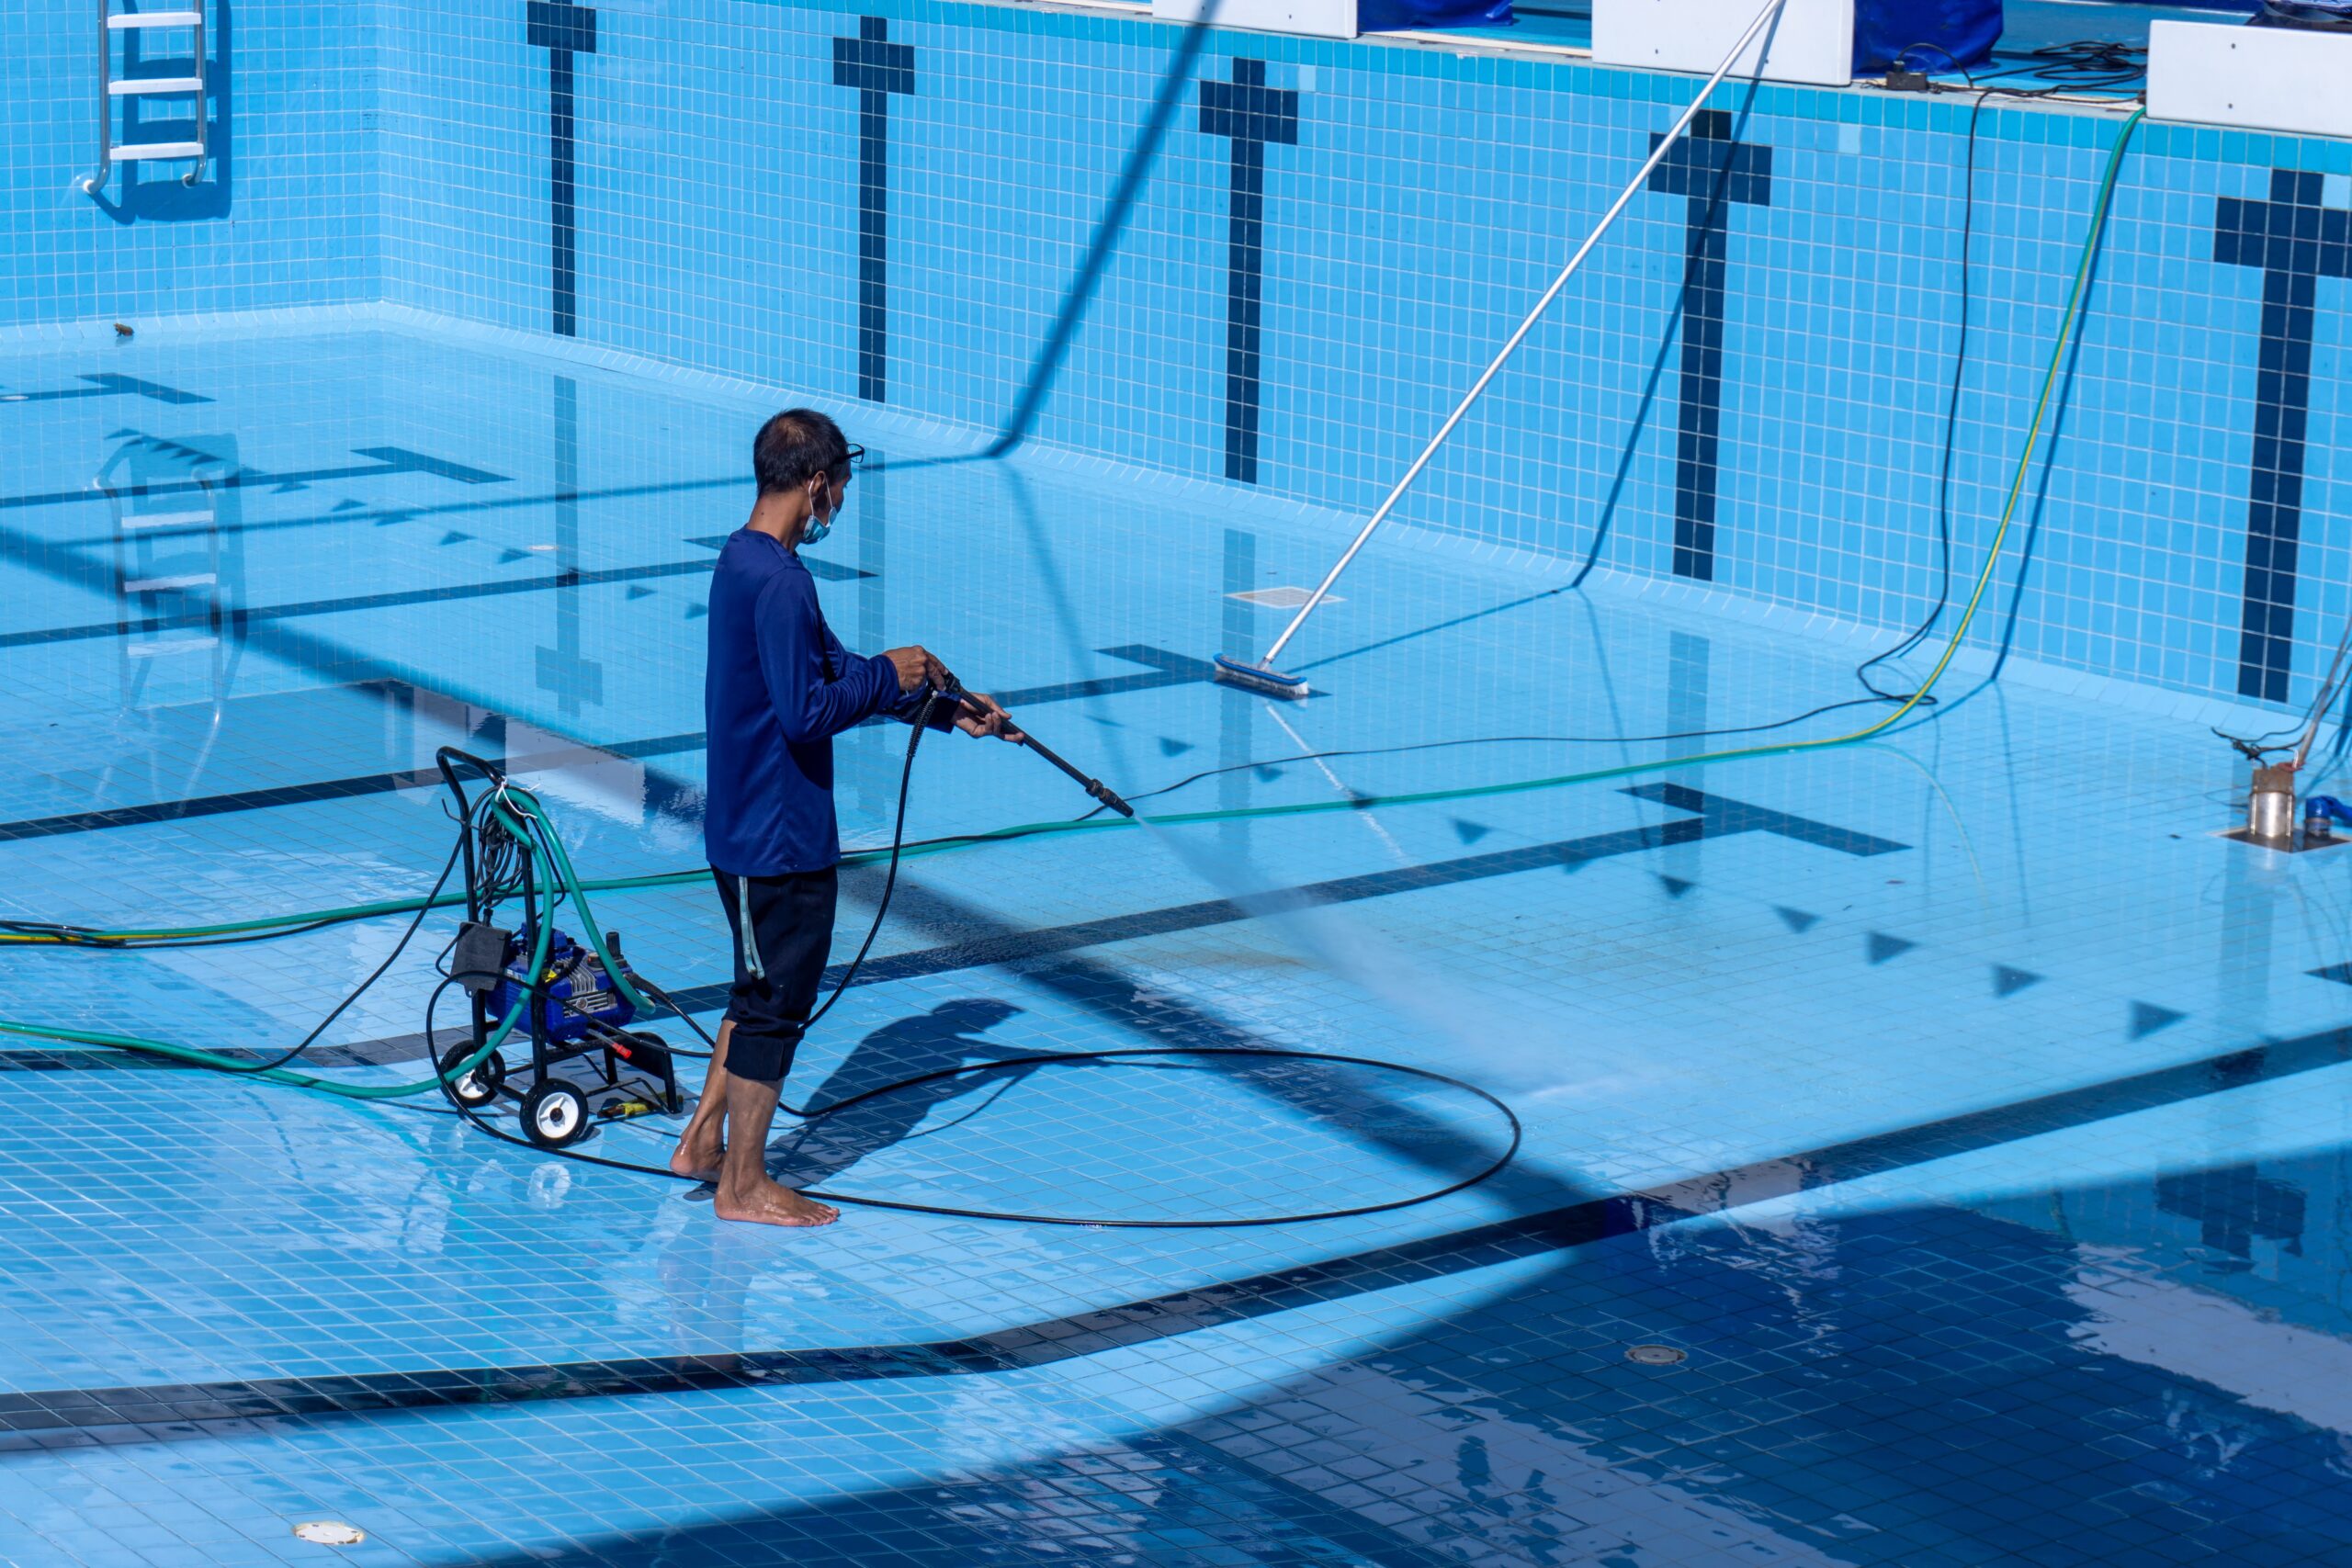 Swimming Pool Cleaning, A service man is cleaning the pool ground with a pressure pump